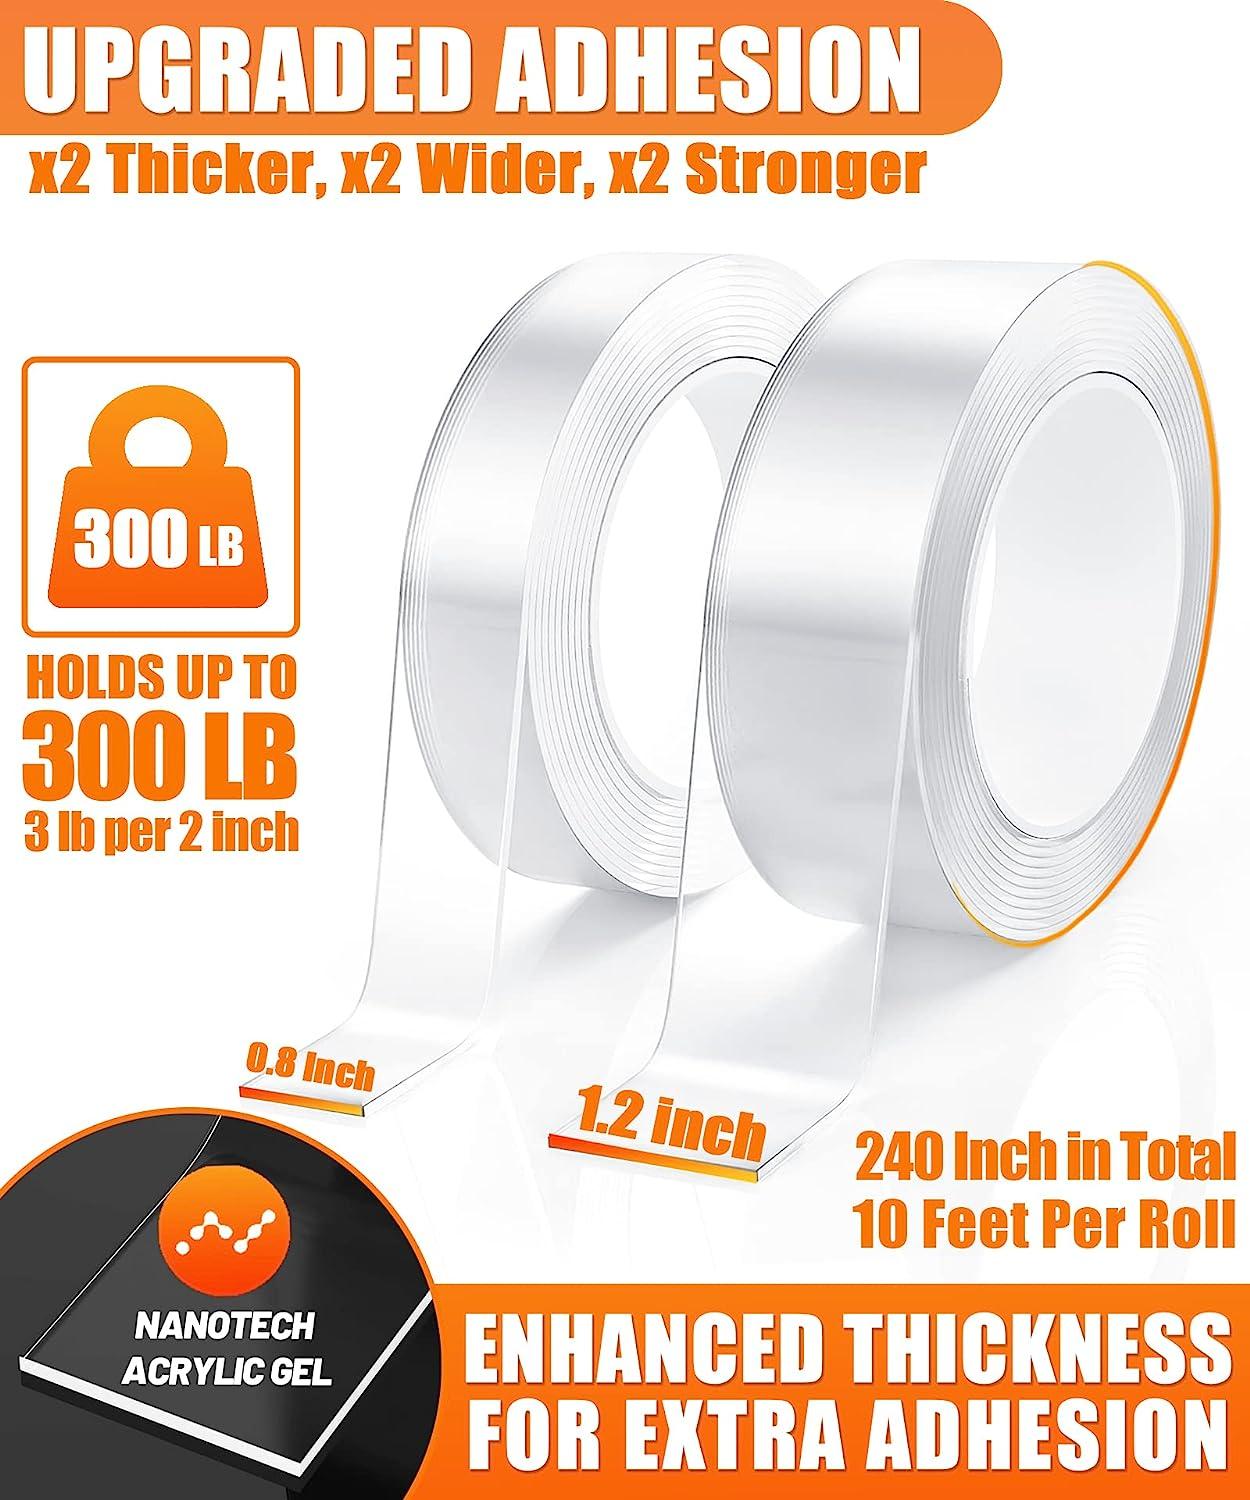 Tape Rolls - Double-Sided Clear Tape